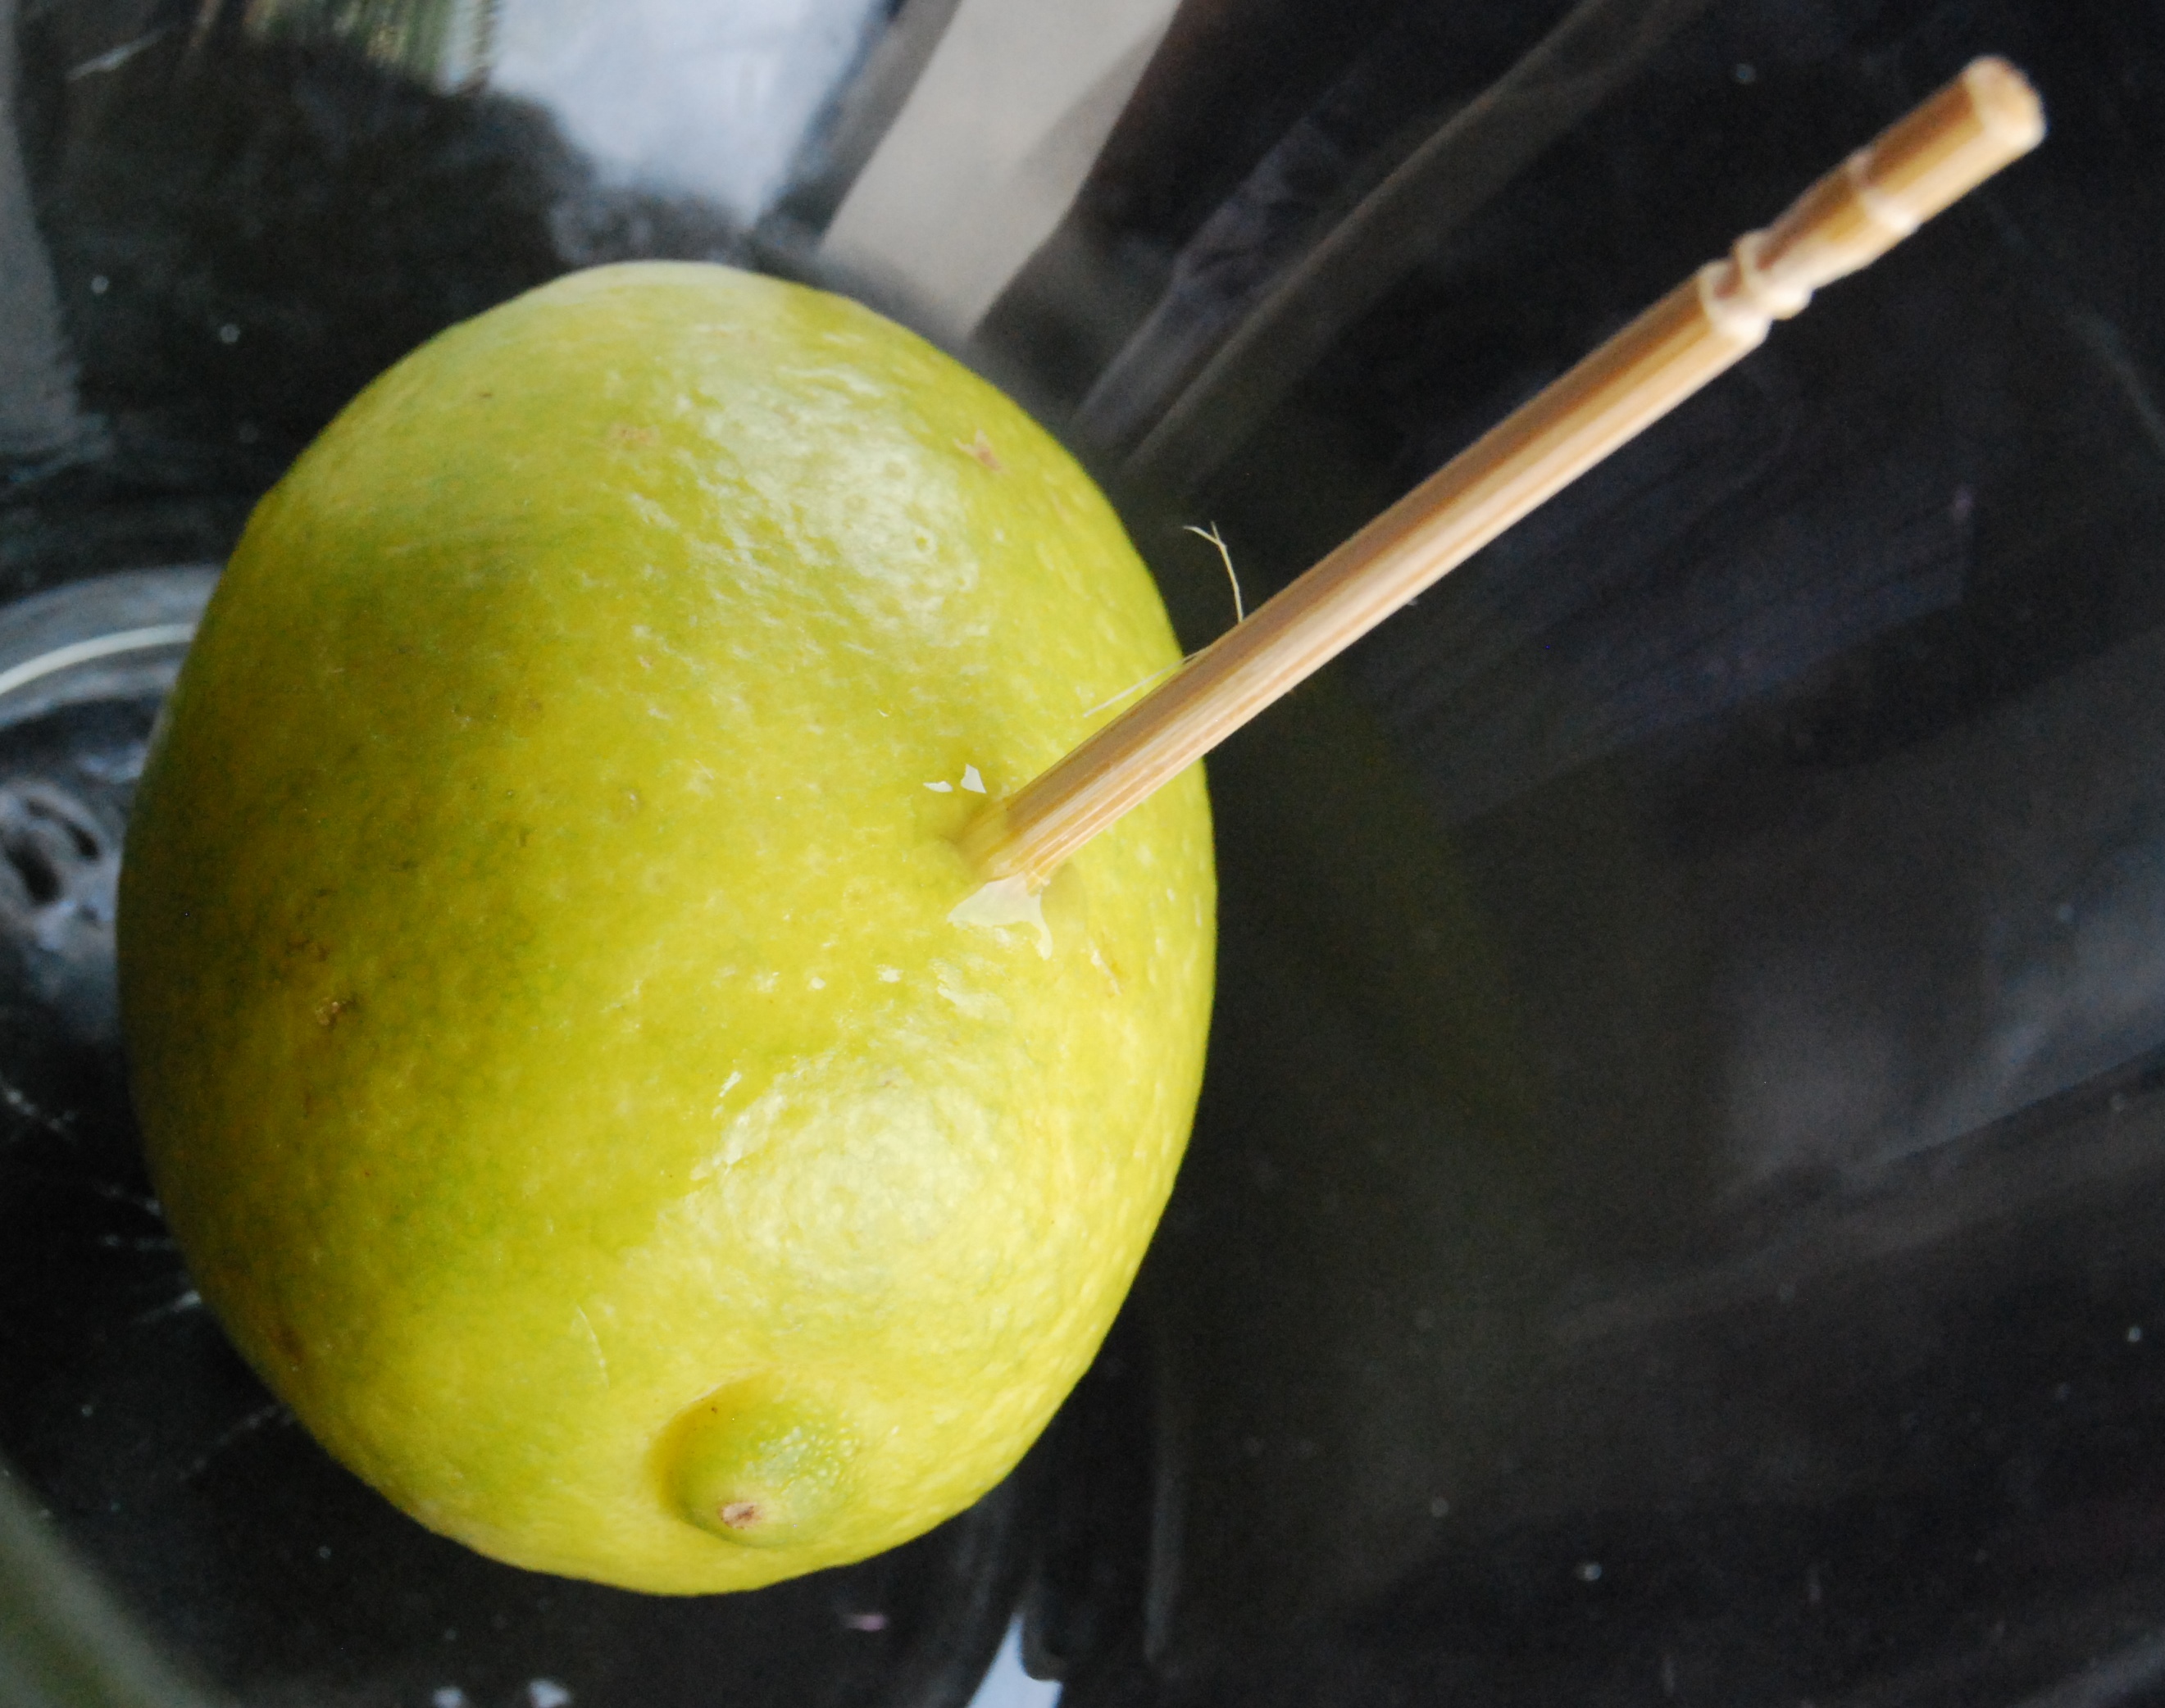 Toothpick in a lime. - More Clever Kitchen Solutions and Life Hacks